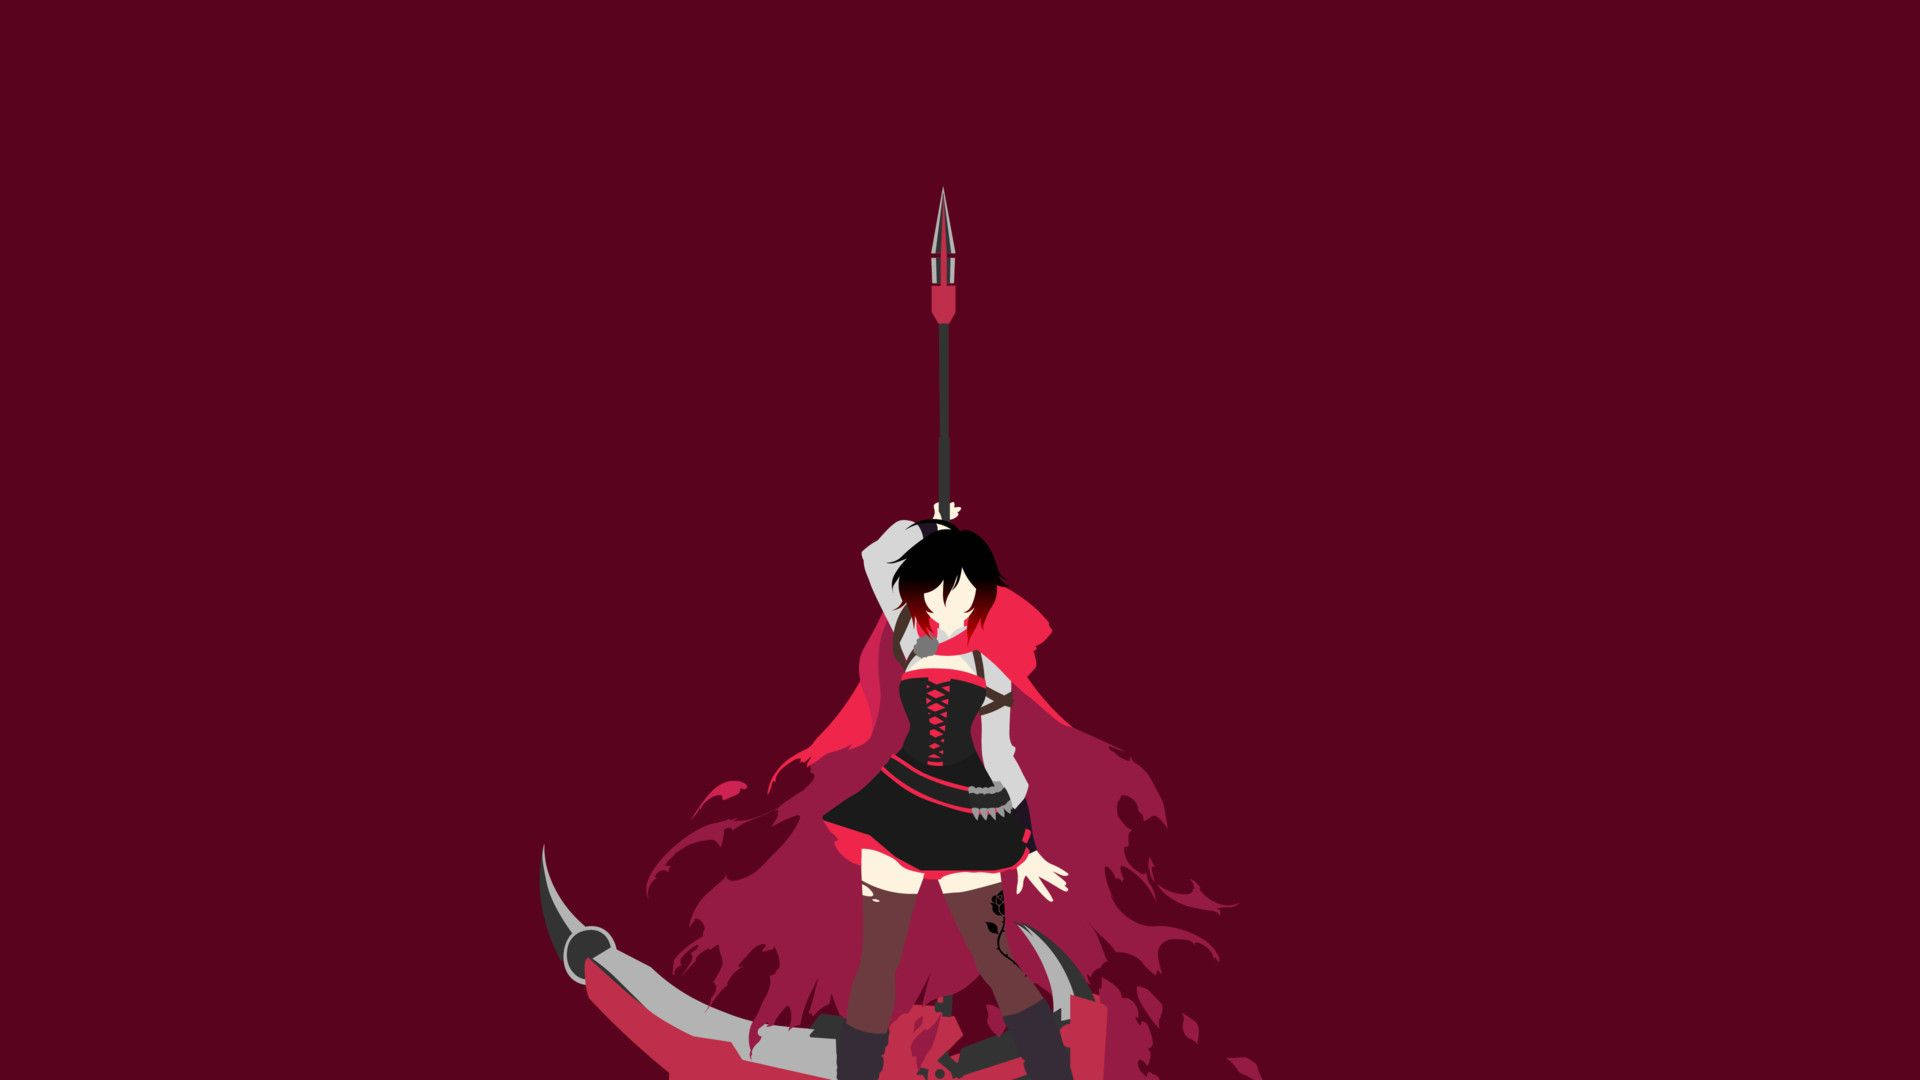 Awesome Rwby Ruby Rose Vector Fan Art Wallpaper